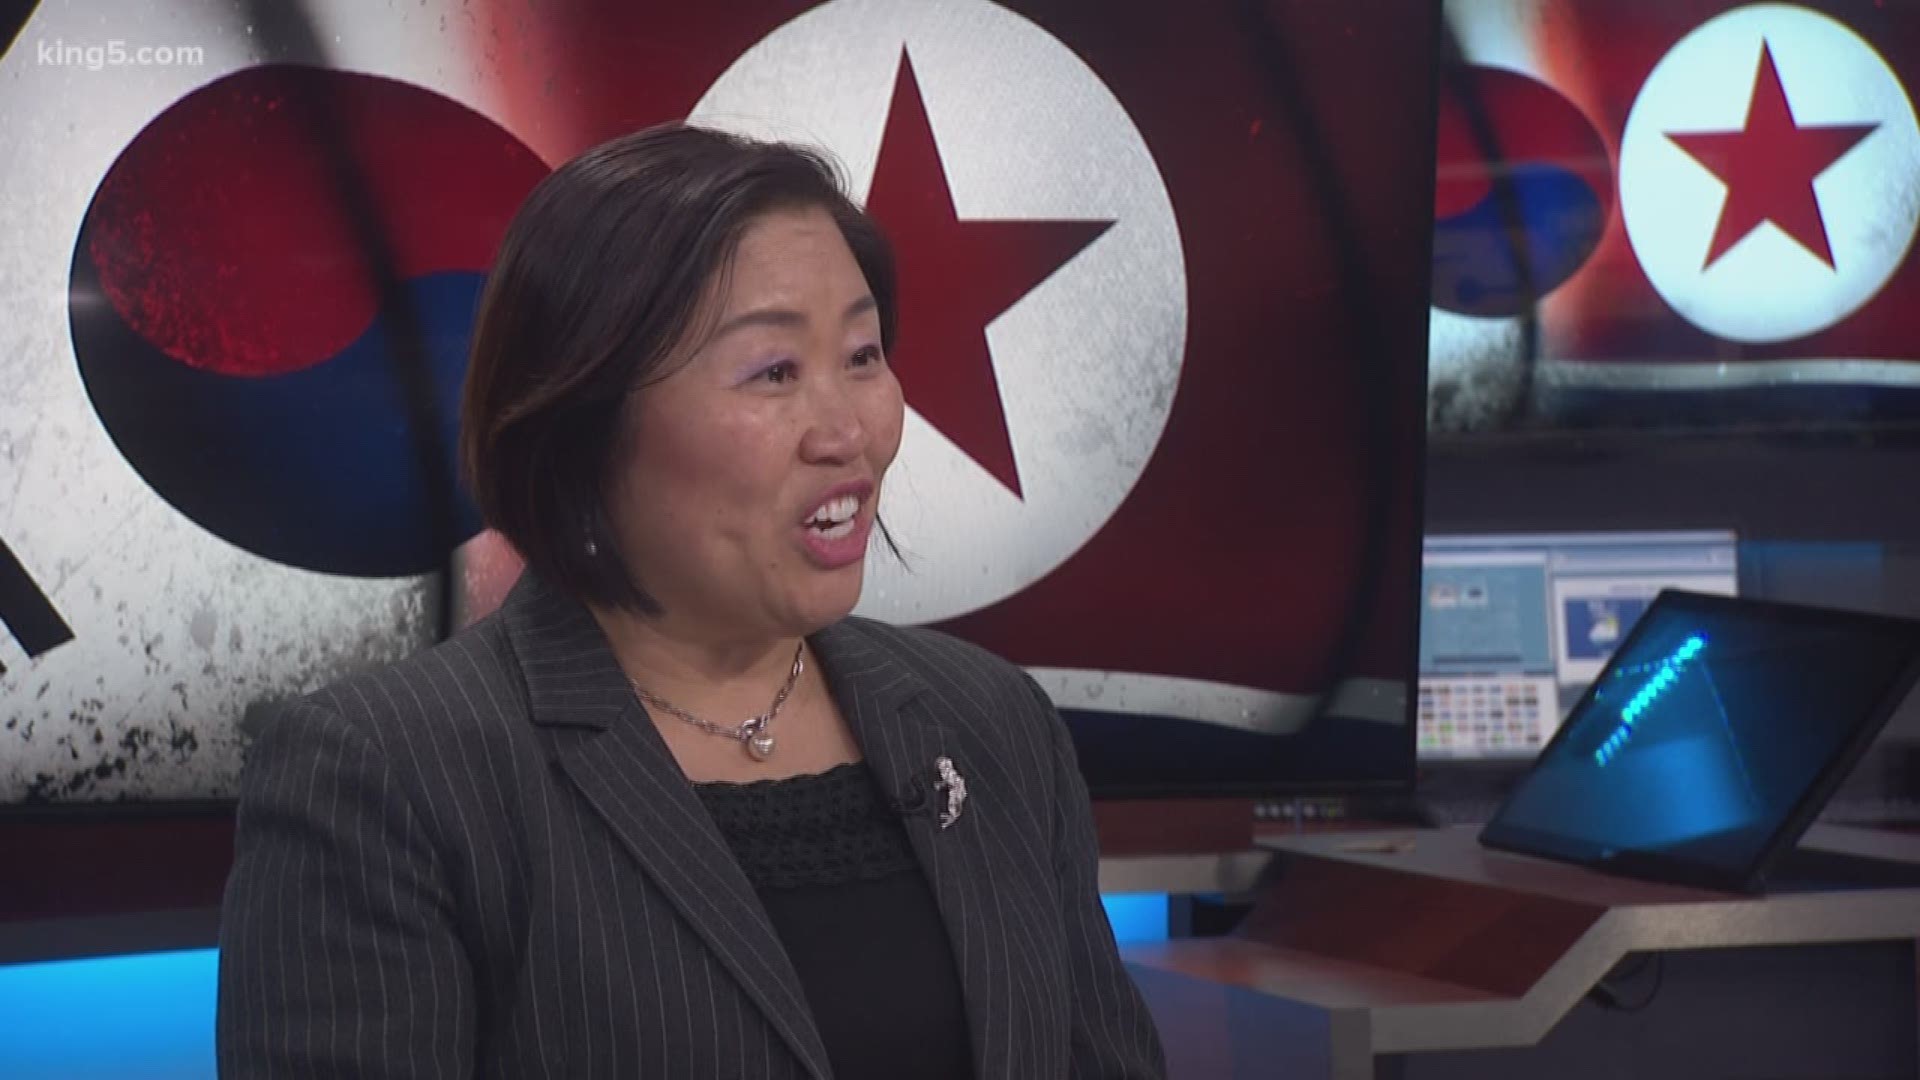 Former Shoreline Councilmember Cheryl Lee shares insights on the historic North and South Korean summit.